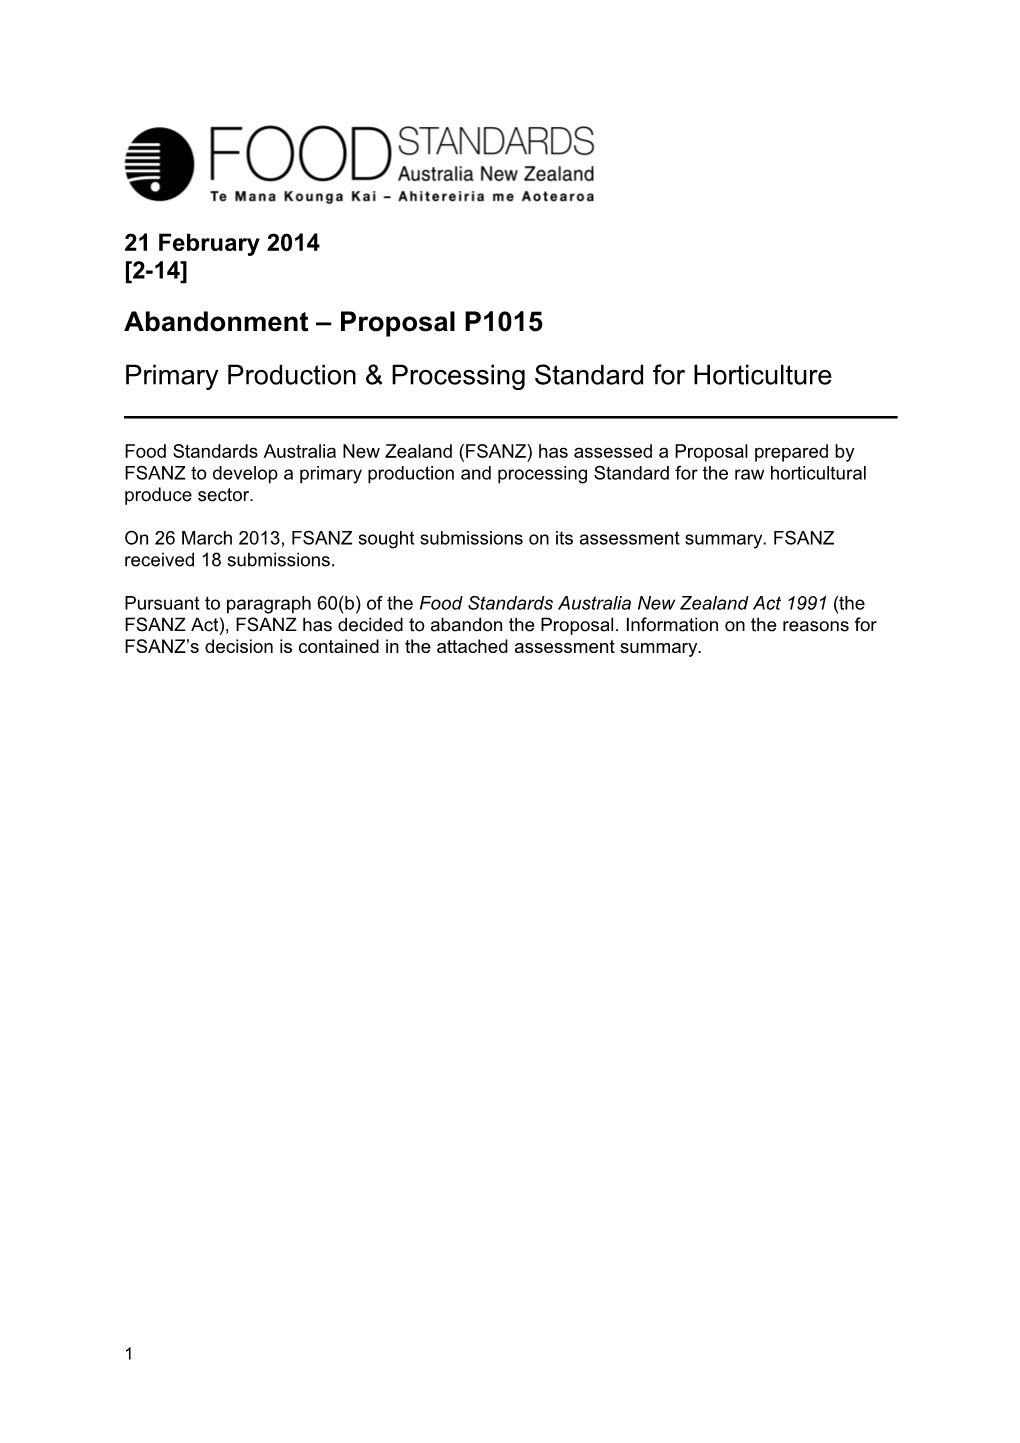 Primary Production Processing Standard for Horticulture